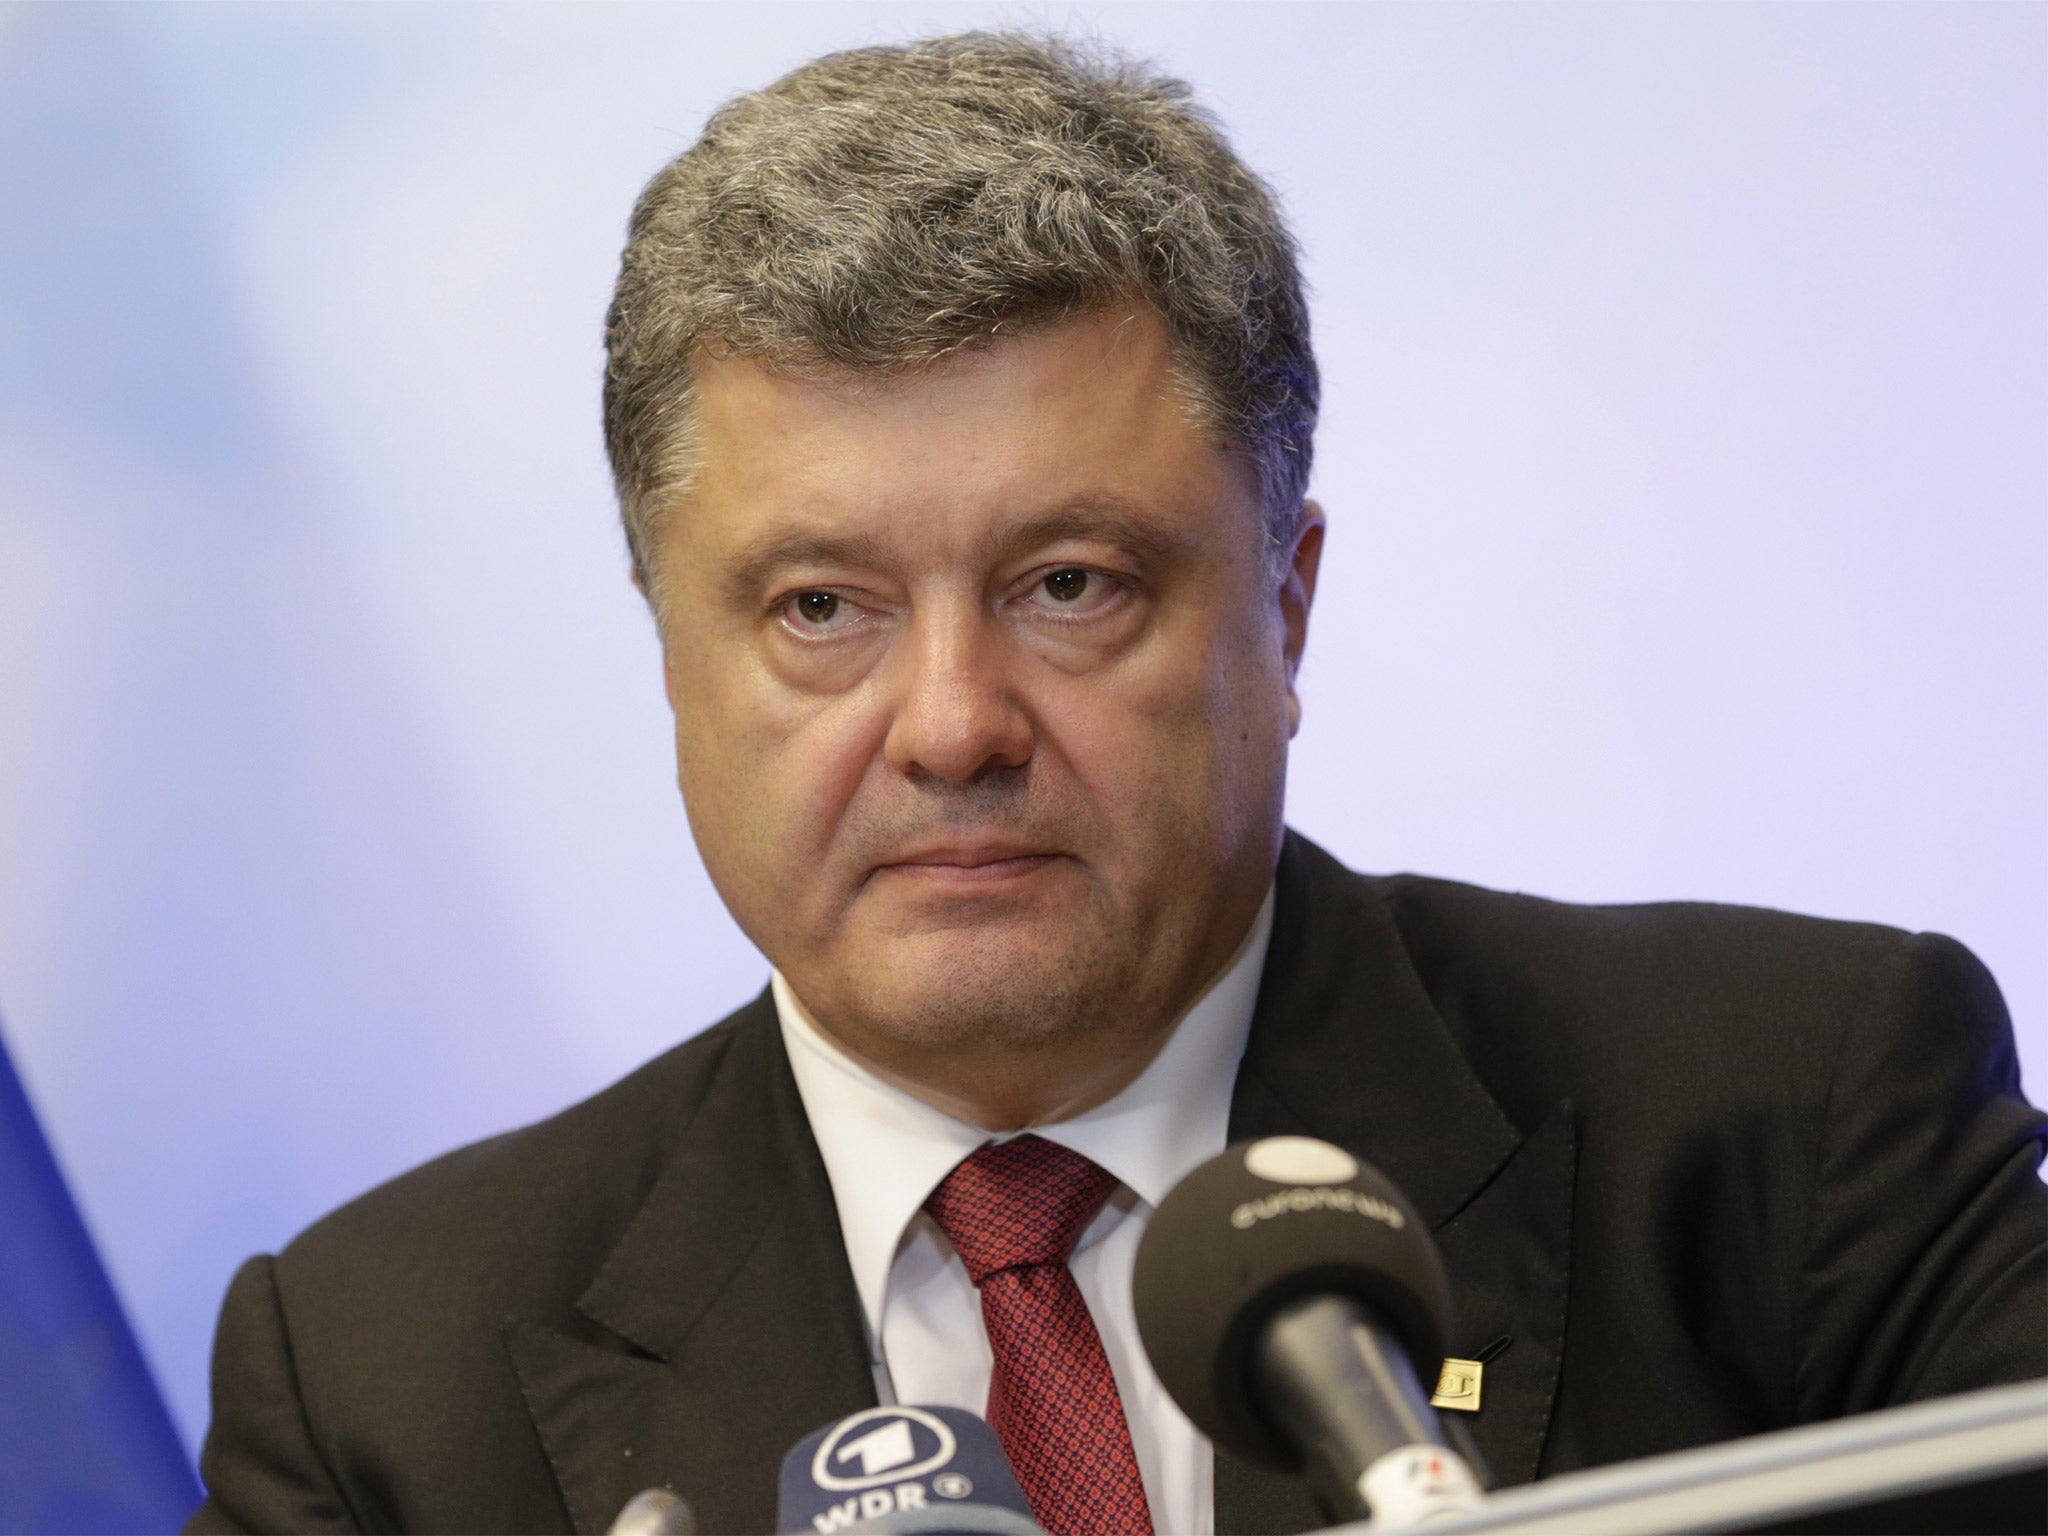 Petro Poroshenko was one of the world leaders named in the Panama Papers